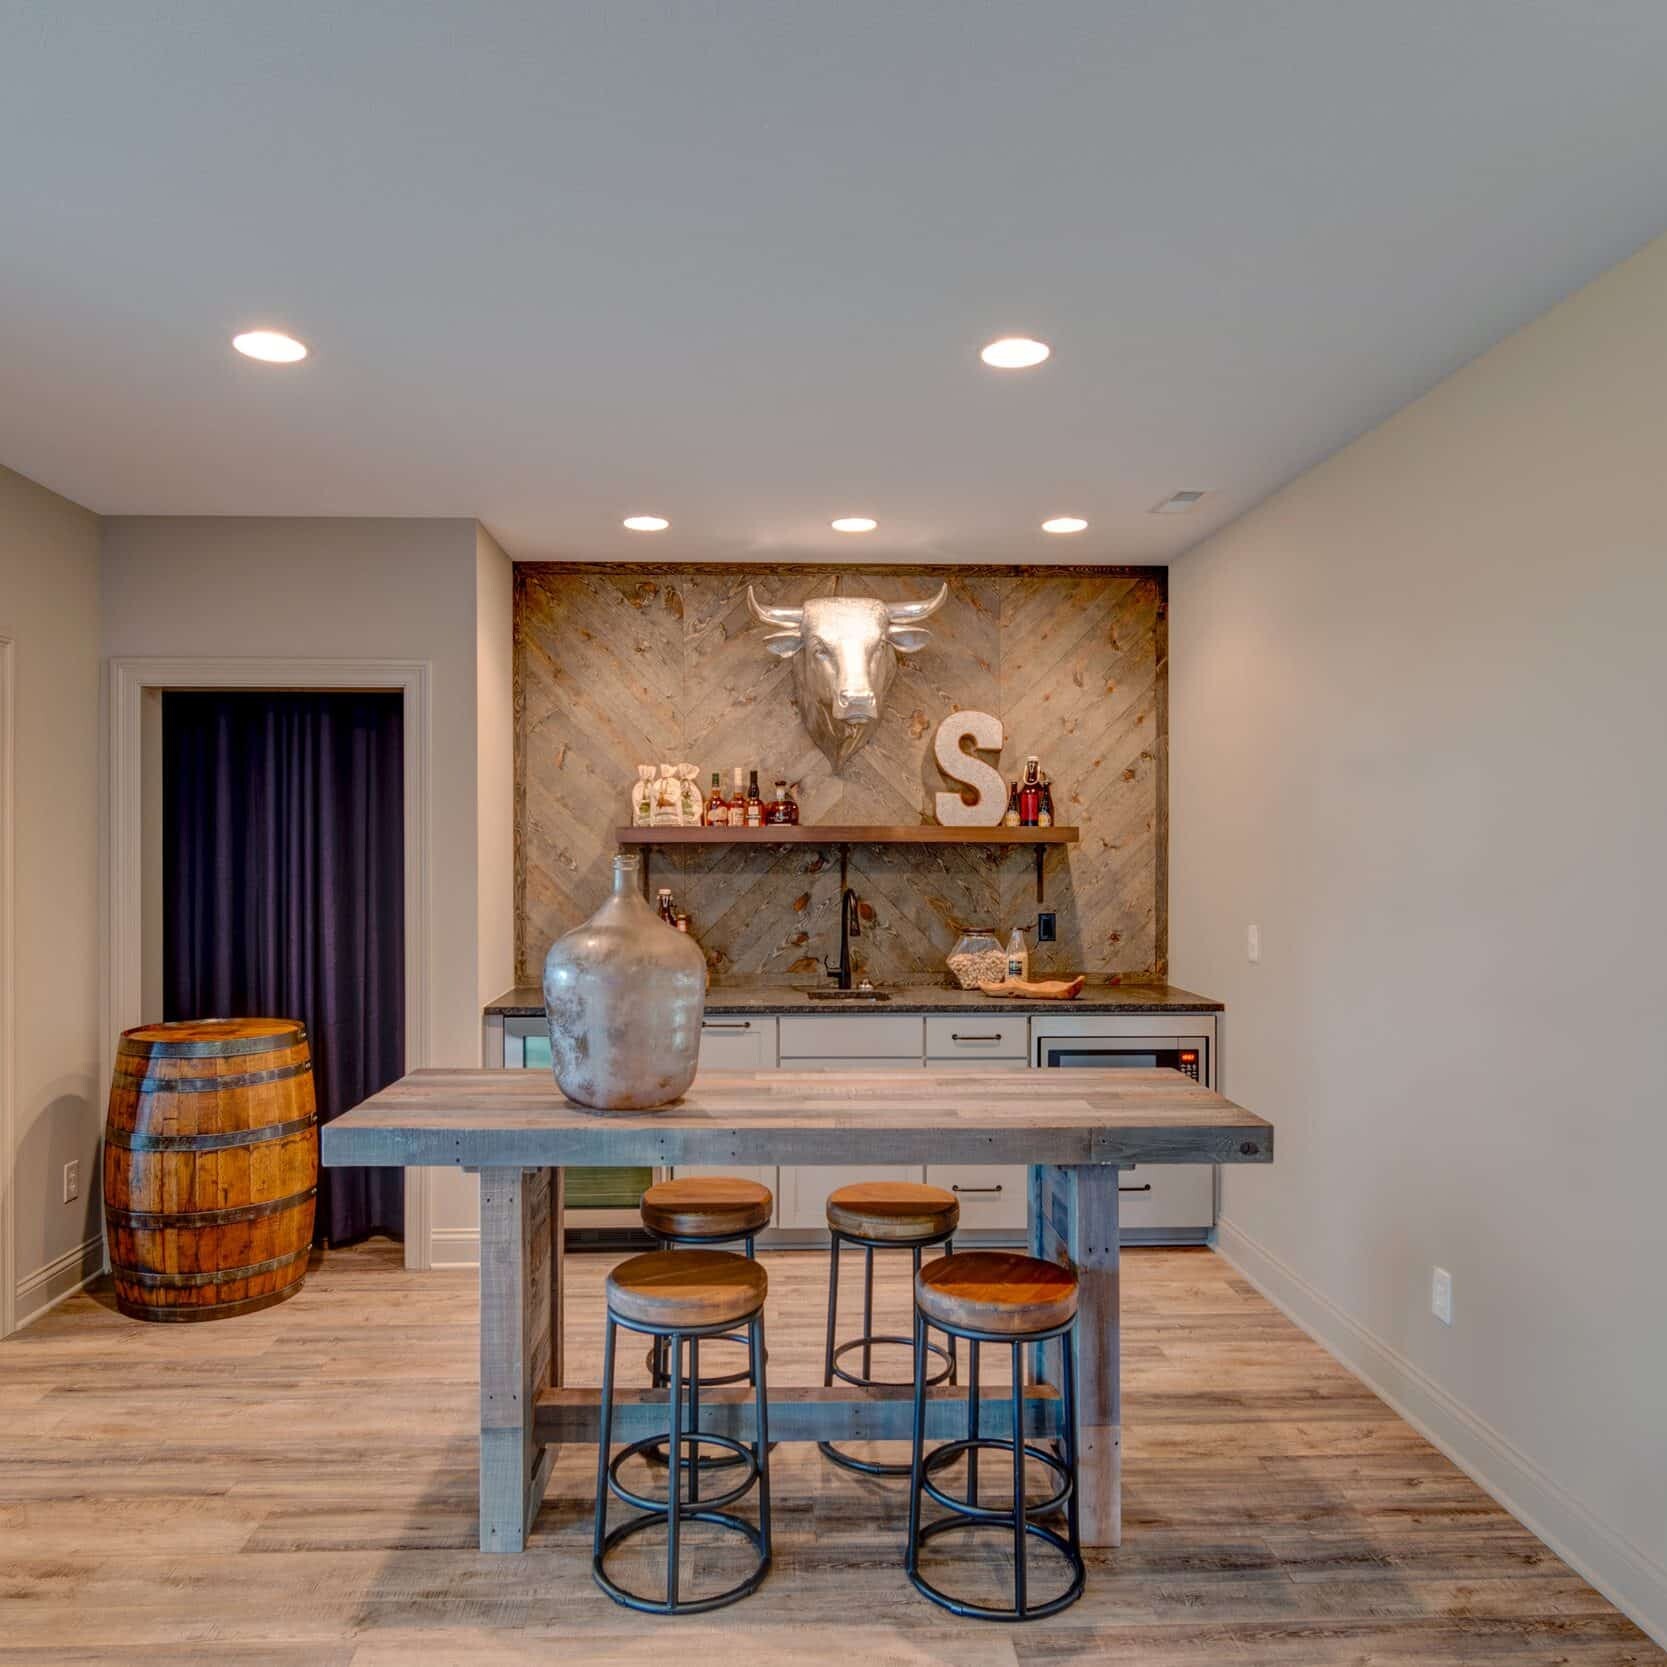 A custom home bar with stools and a wooden floor in a newly constructed home in Indianapolis, Indiana.